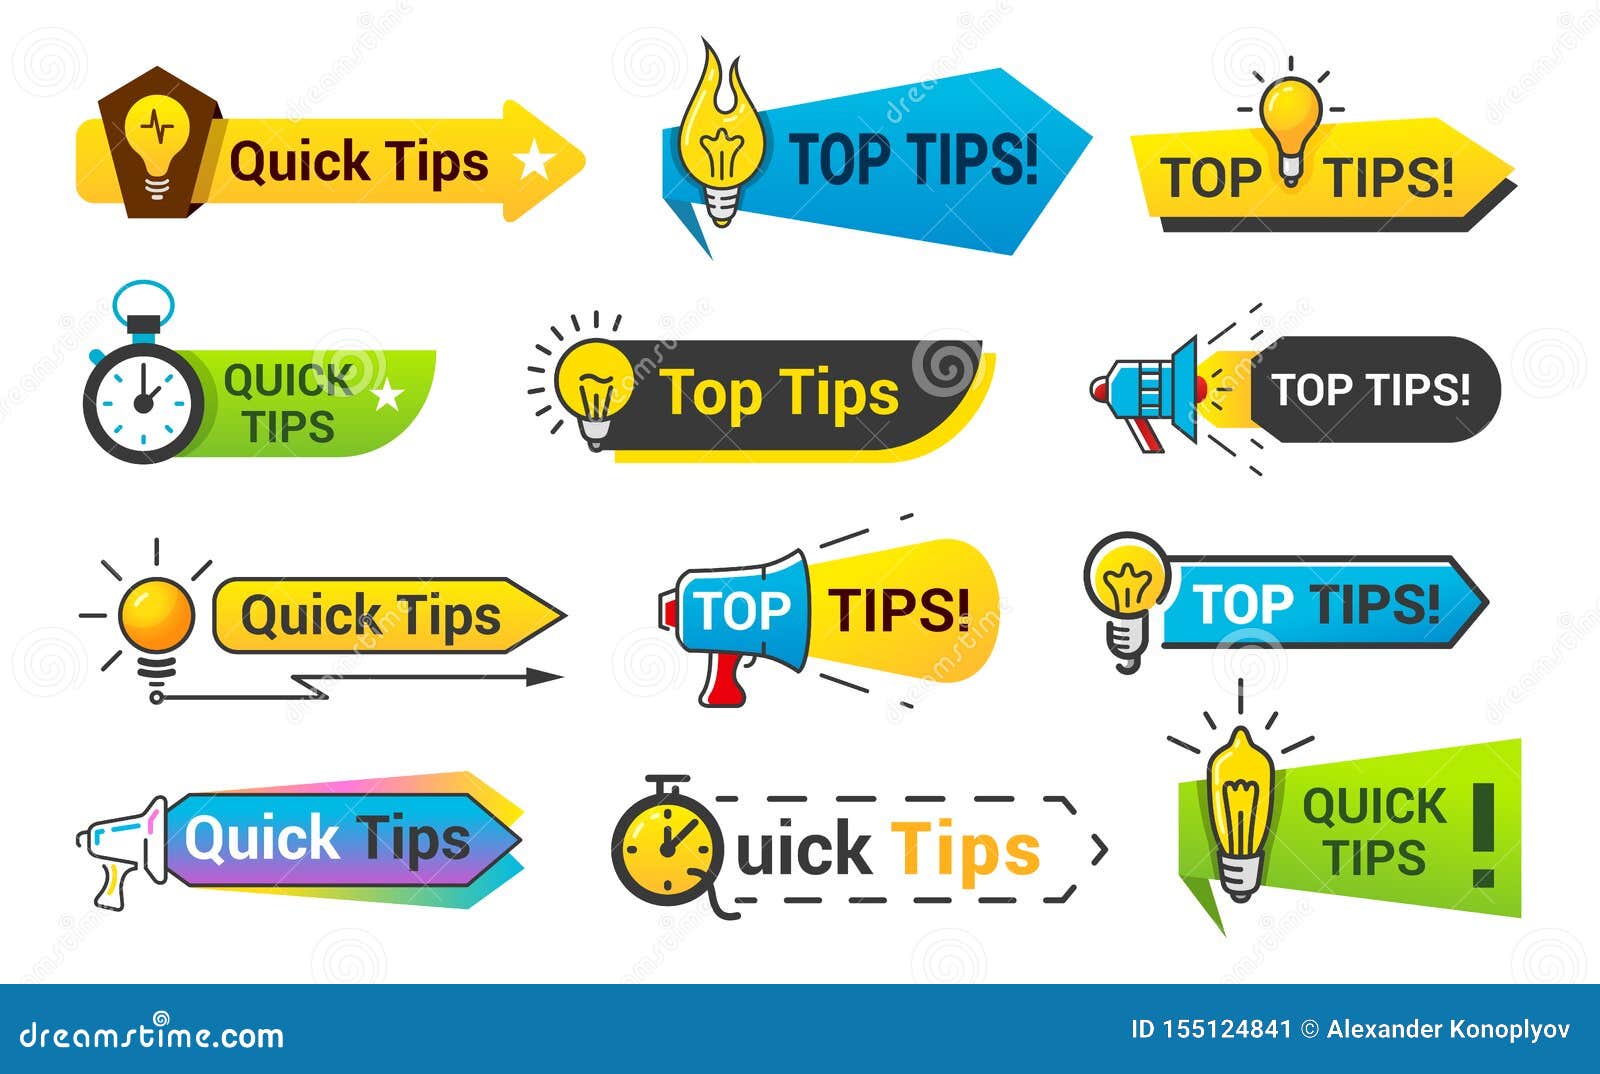 quick tips icon set, information banner 